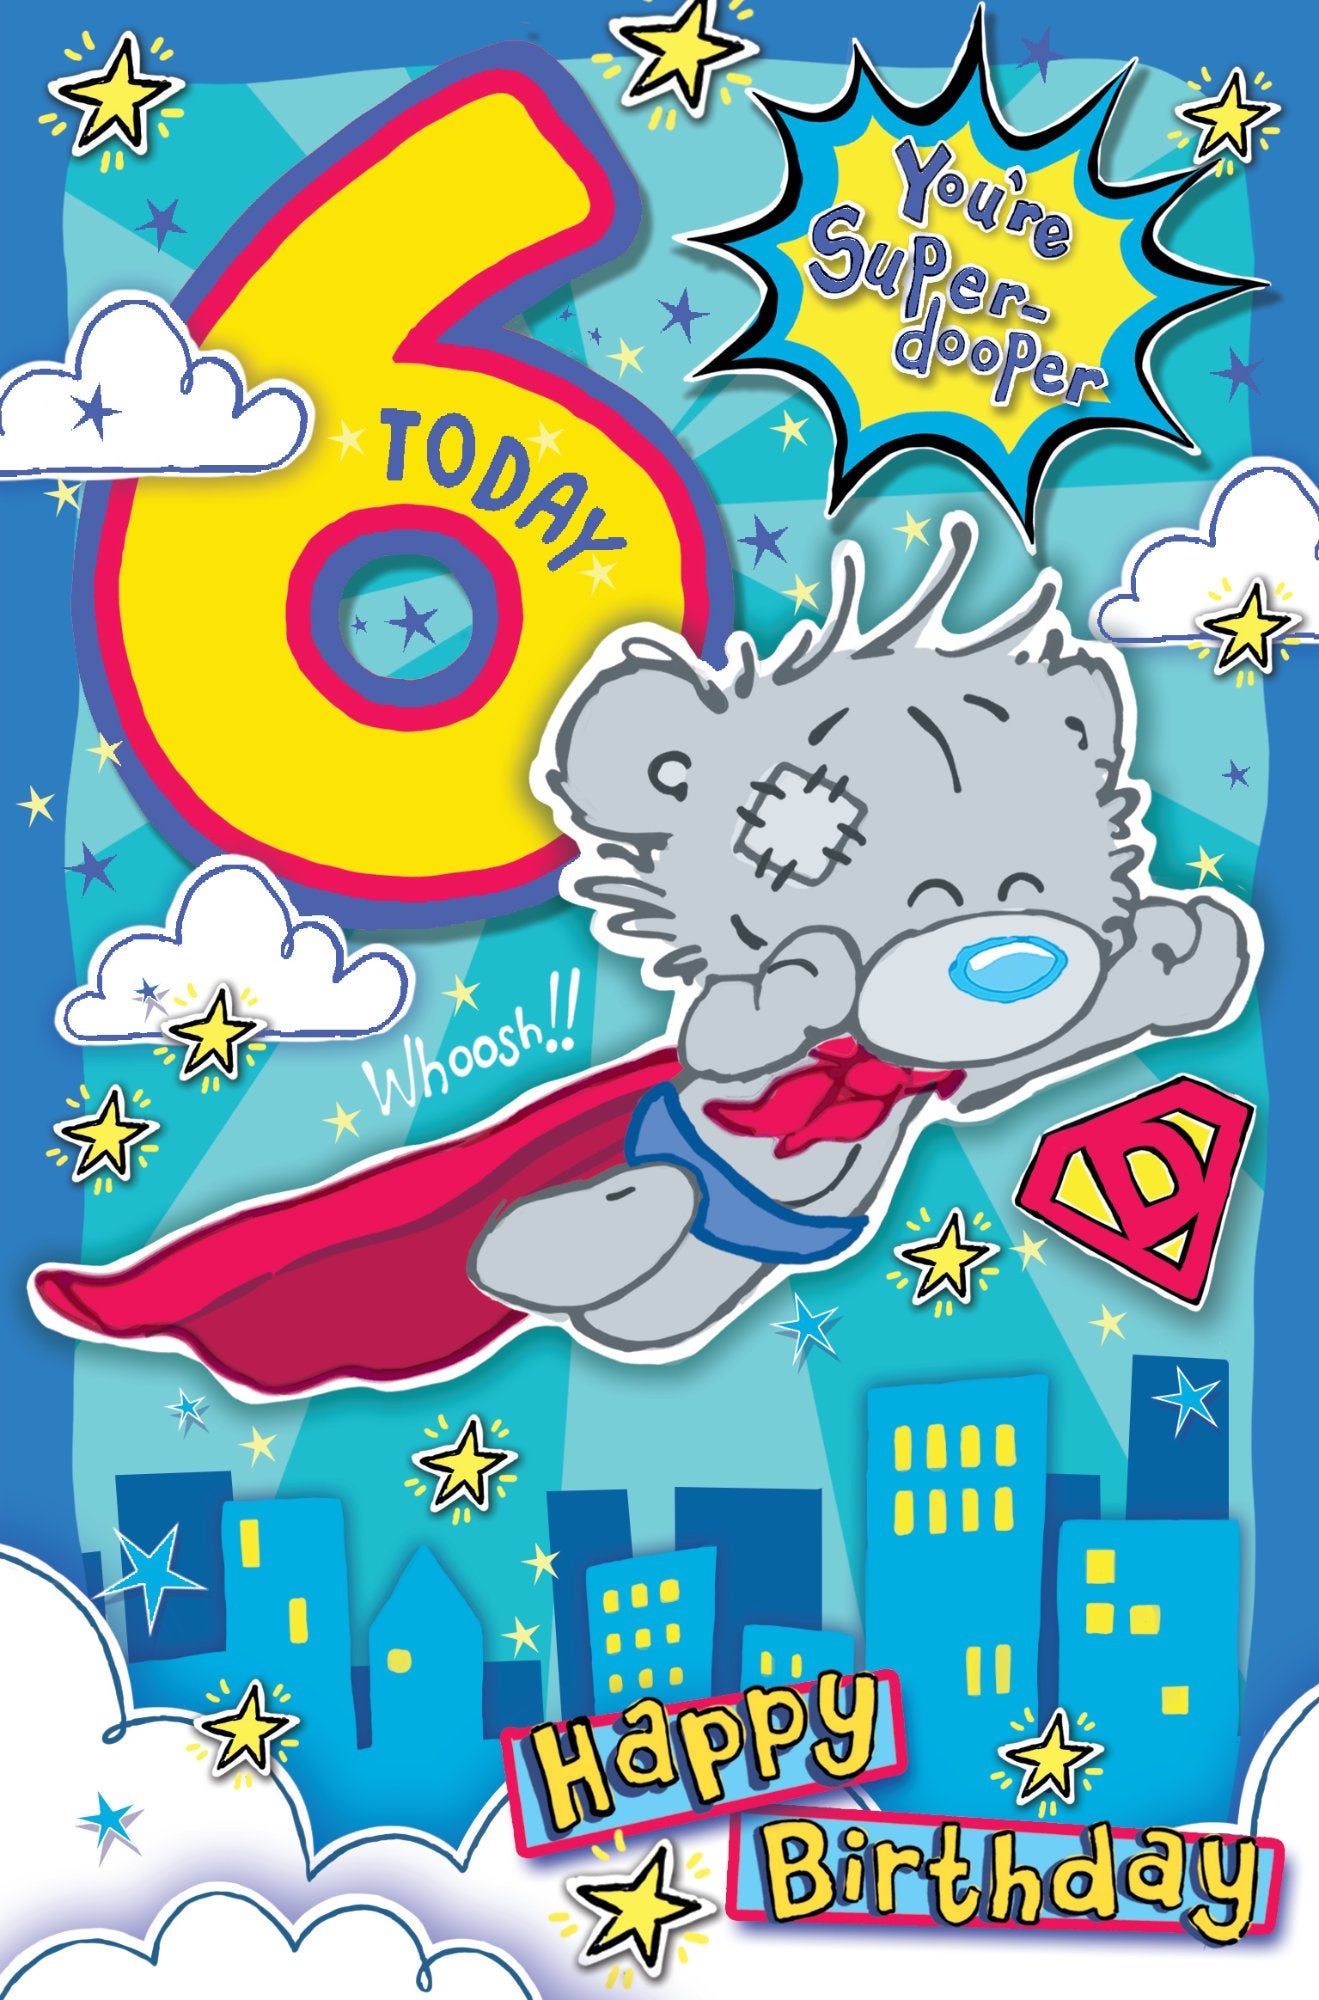 Photograph of 6th Birthday Boy Super Teddy Greetings Card at Nicole's Shop